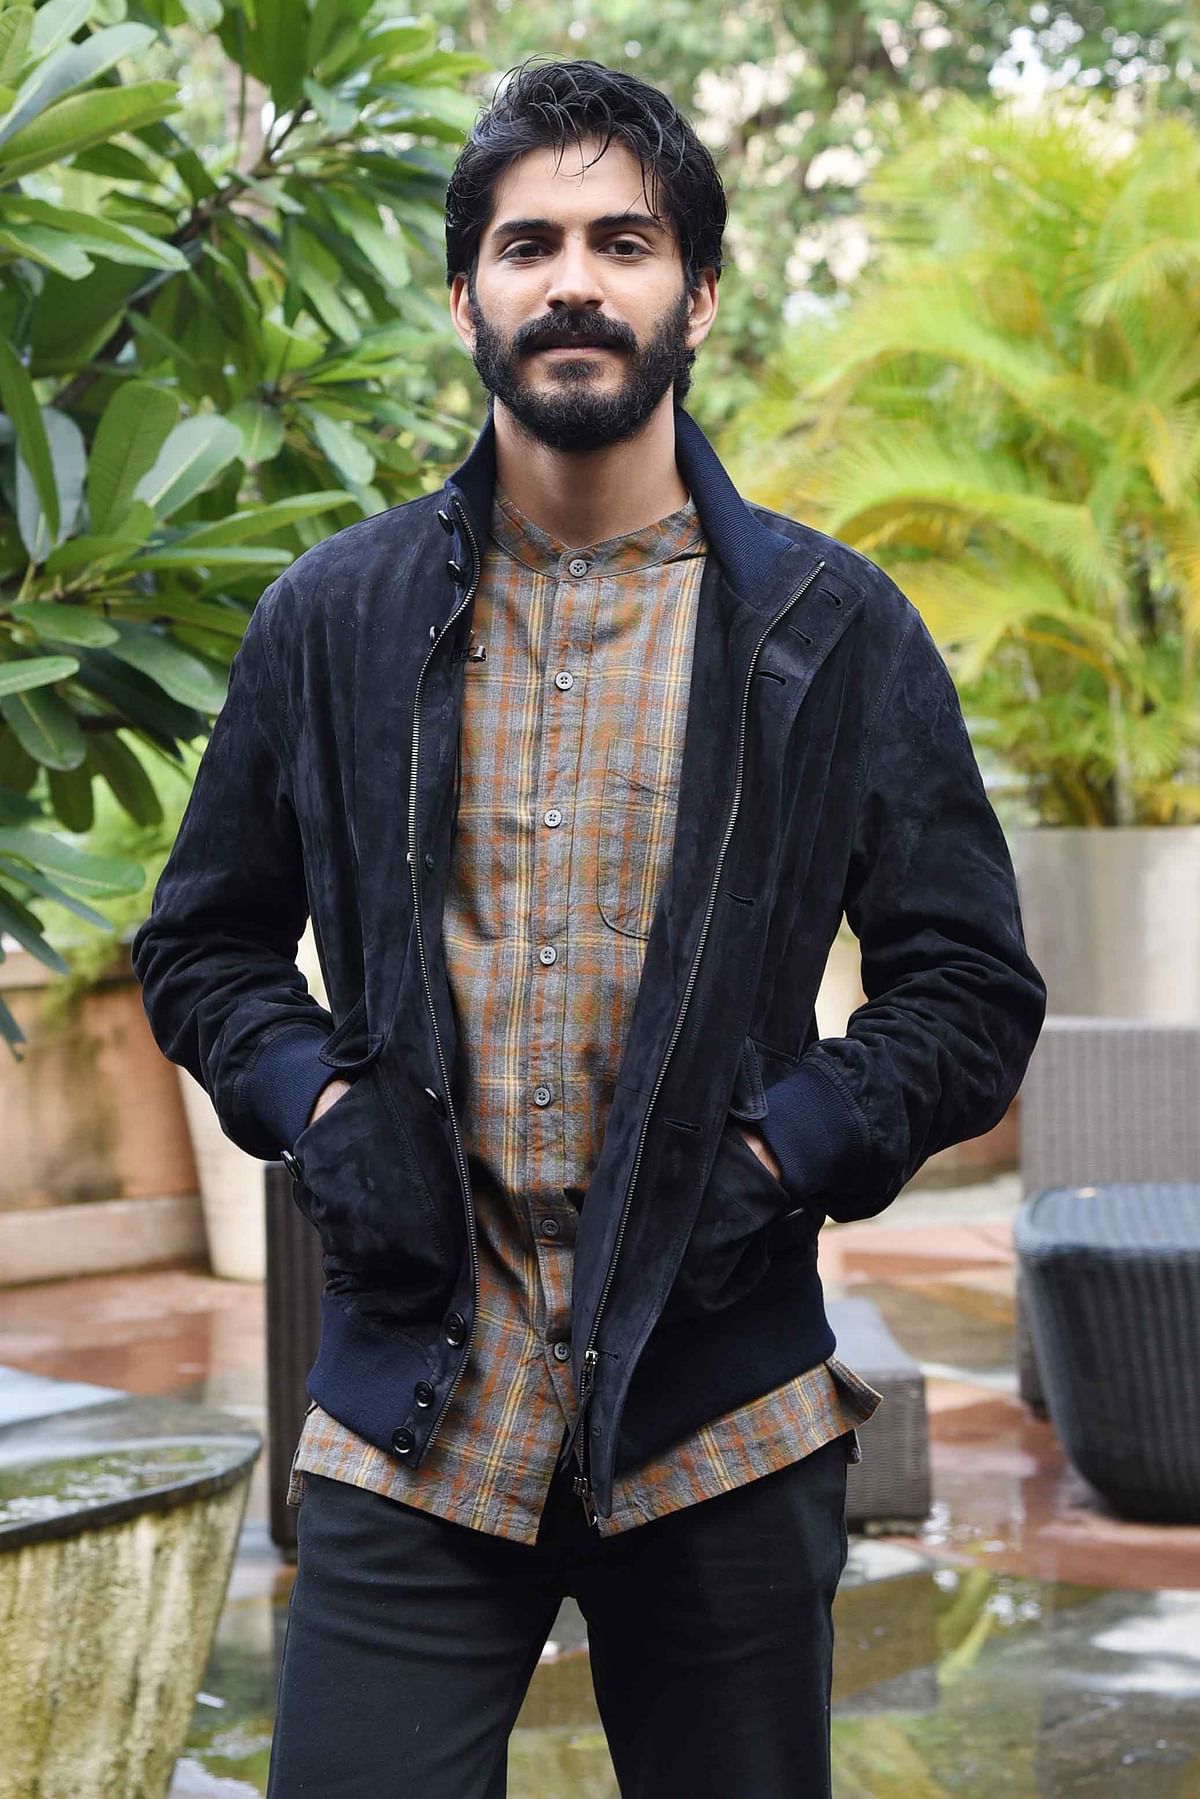 If Harshvardhan Kapoor performs as well as he talks, he is here to stay.